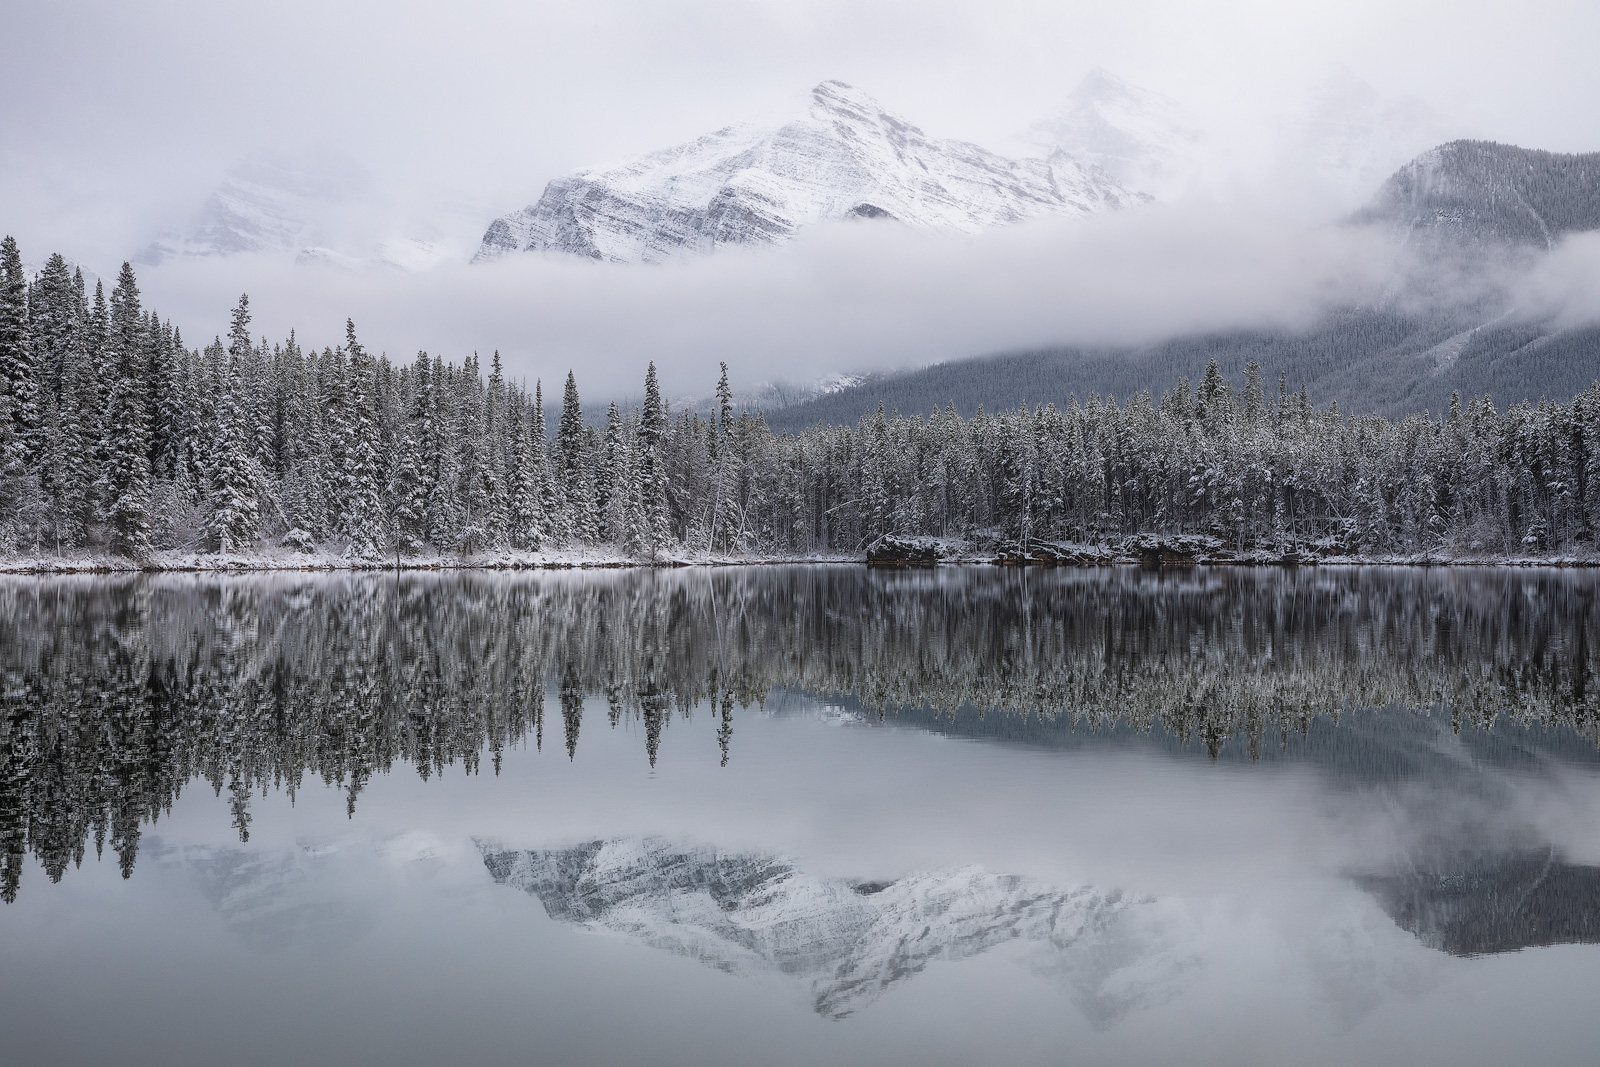 A snow-capped mountain reflected in a lake on a misty morning.